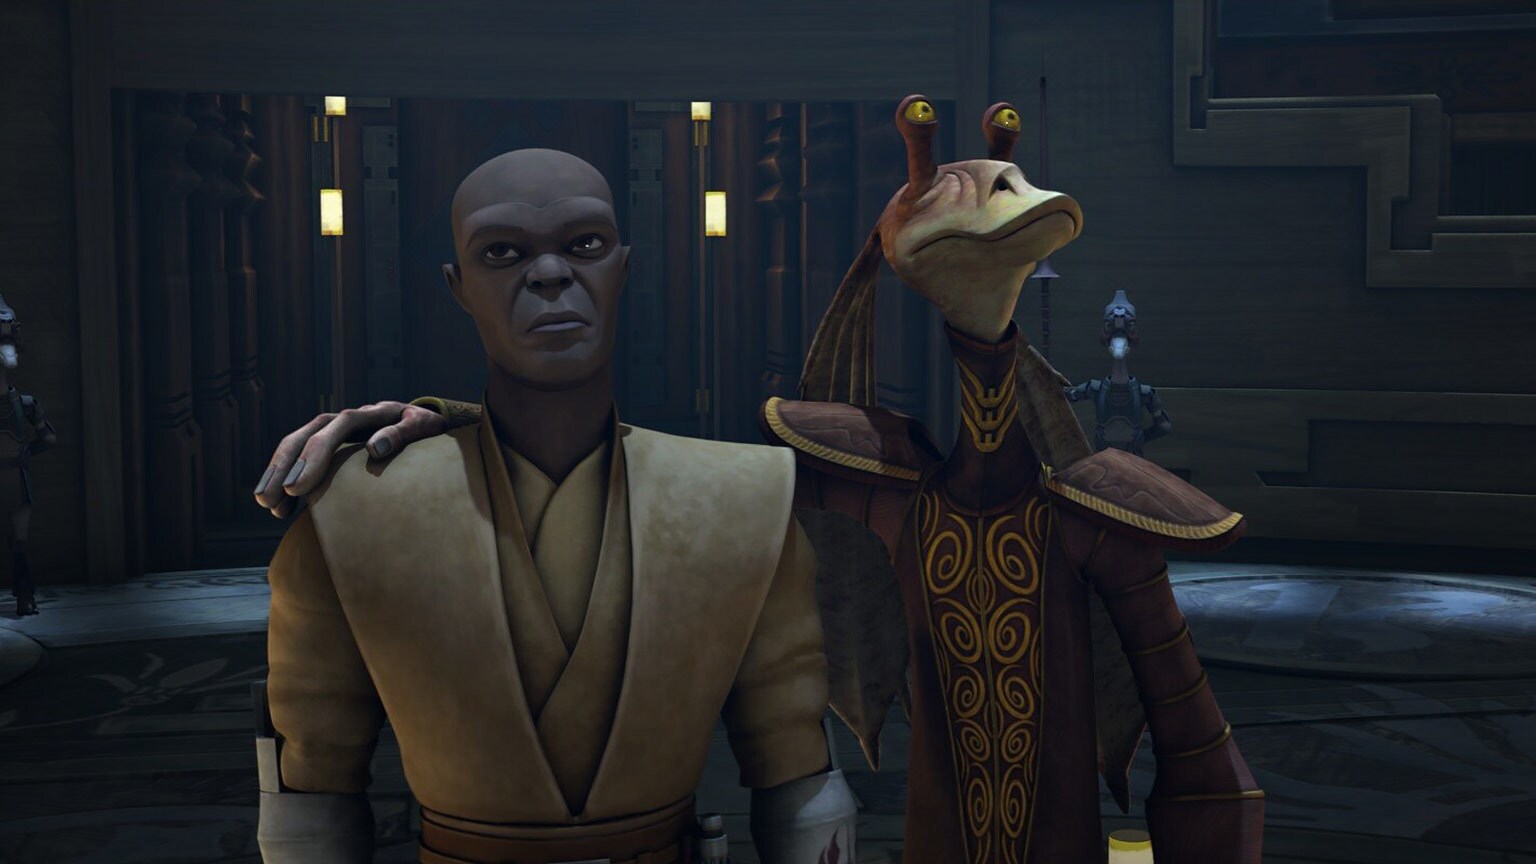 The Clone Wars Rewatch: Jar Jar and "The Disappeared"